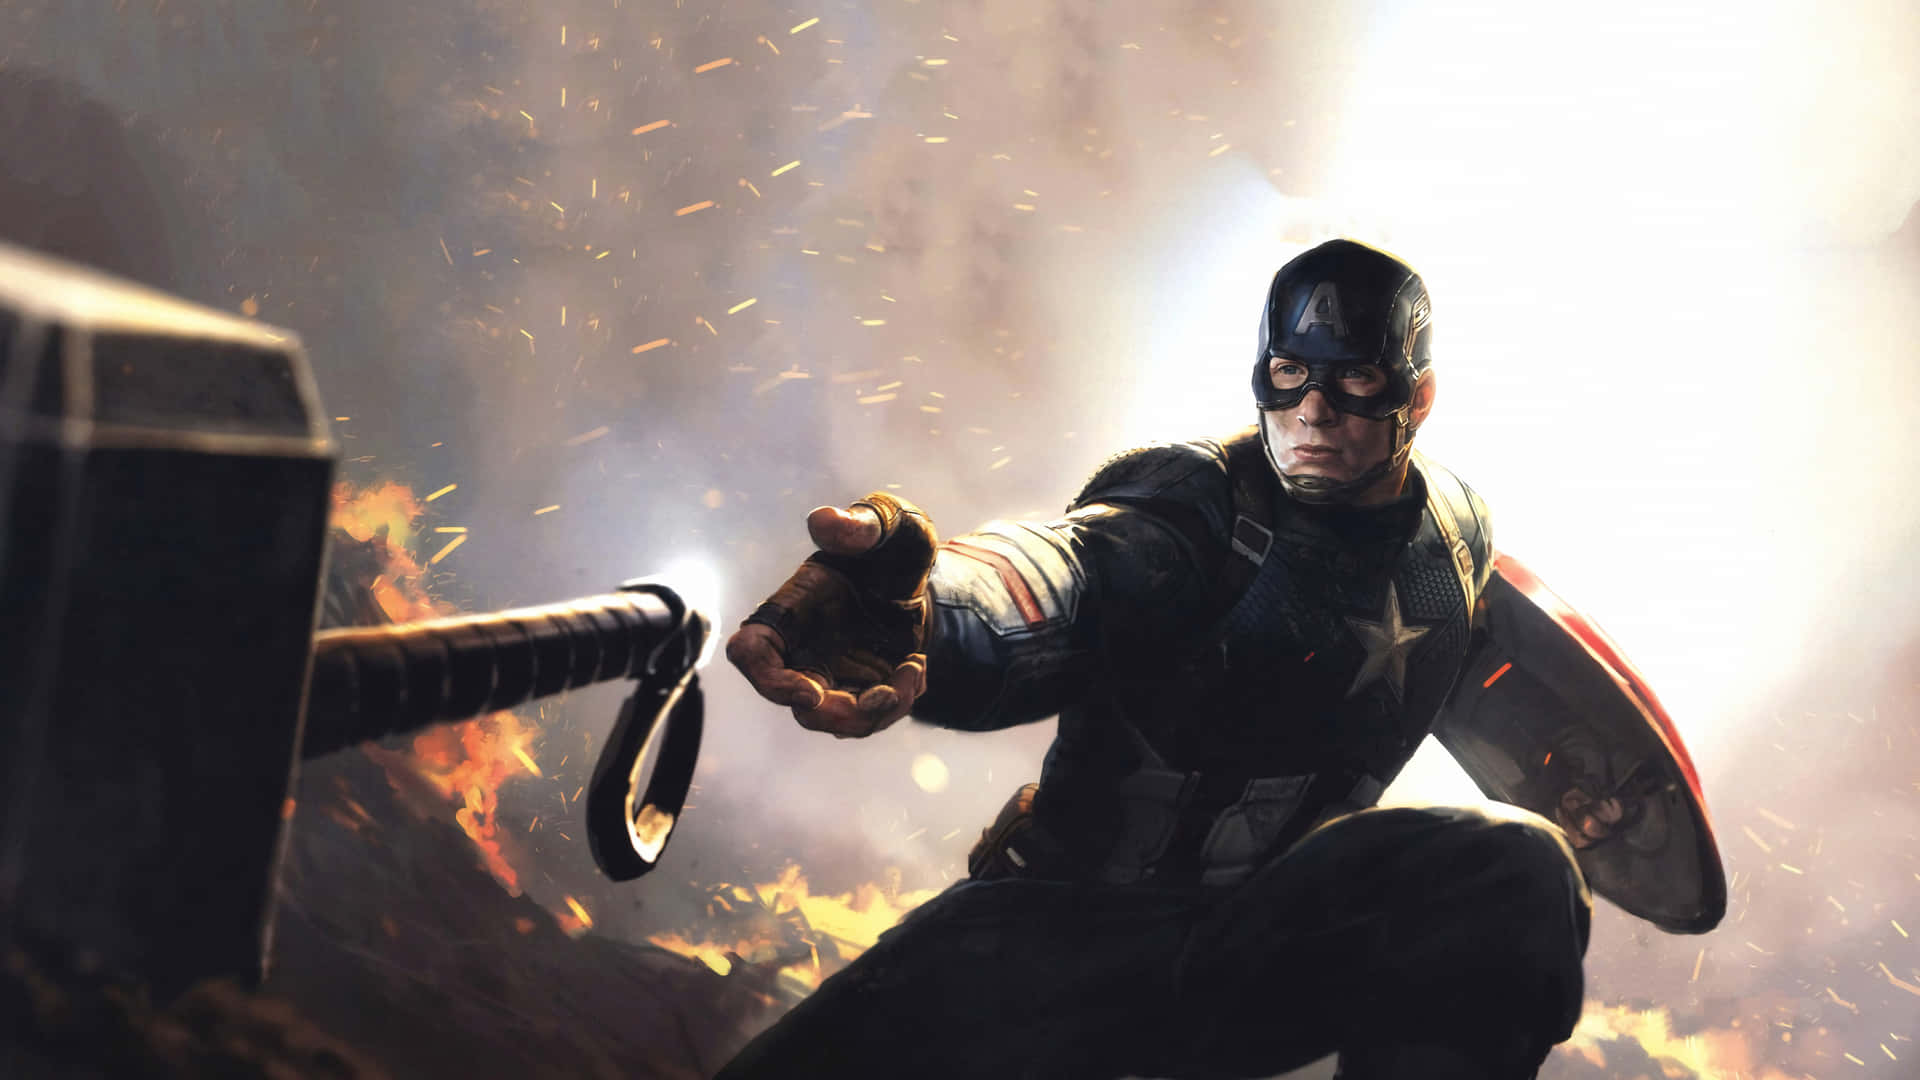 Captain America stands as the ultimate symbol of strength and courage. Wallpaper